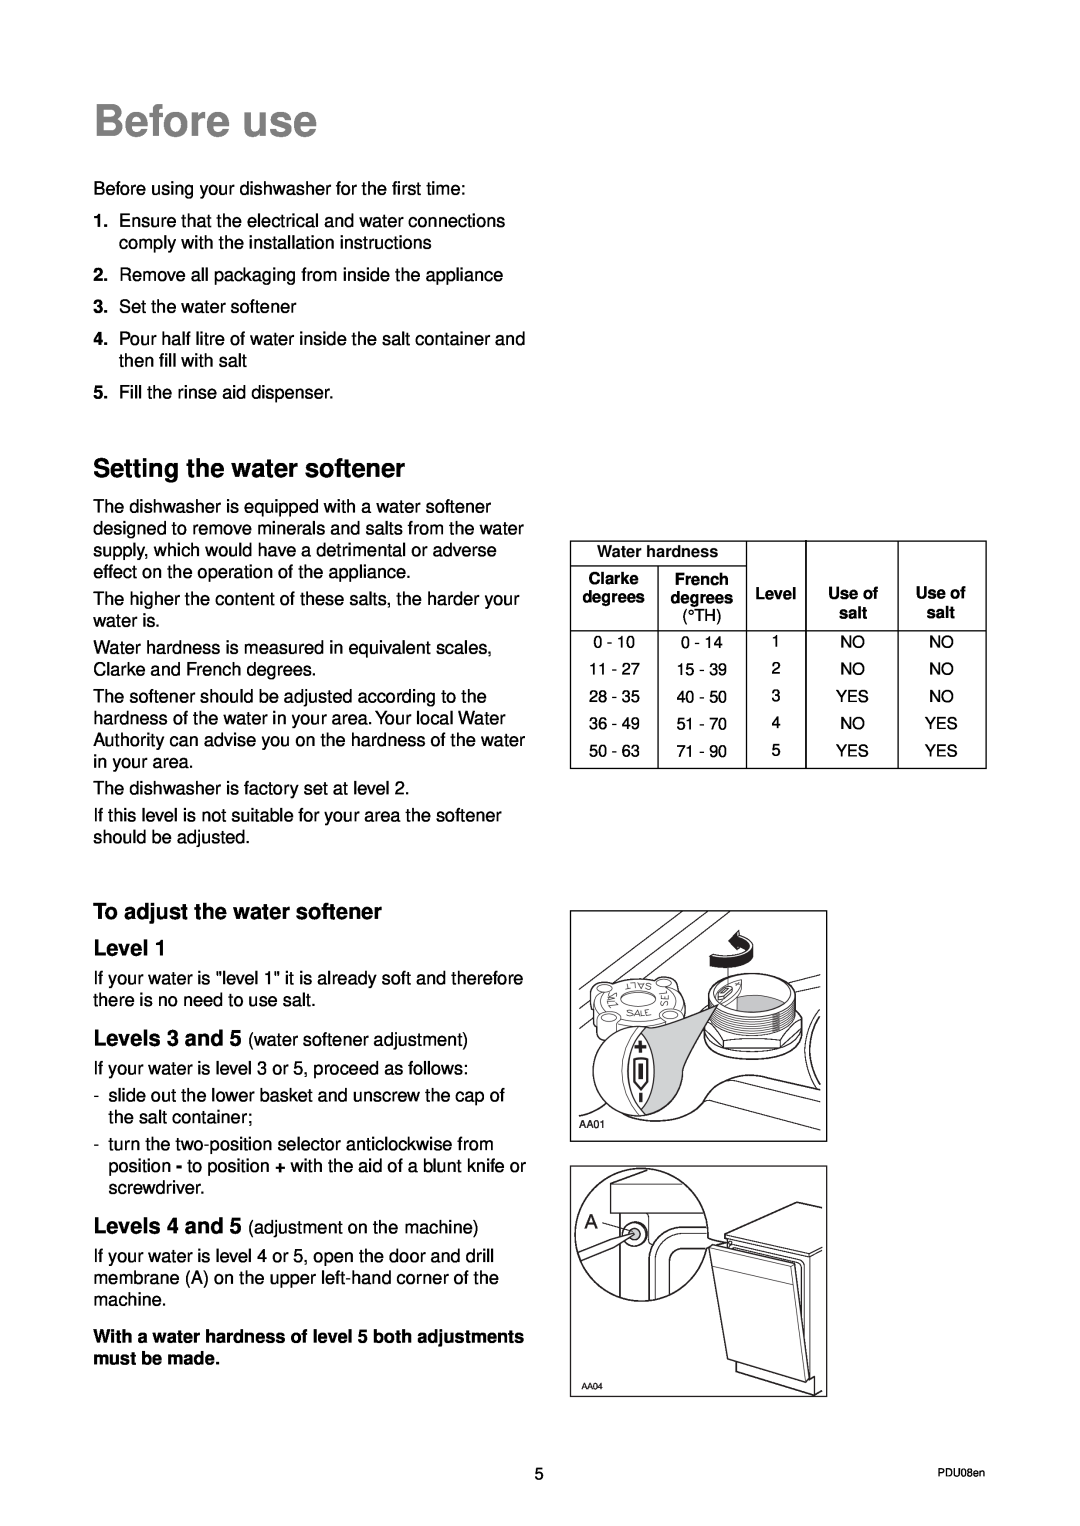 Zanussi DWS 39 manual Before use, Setting the water softener, To adjust the water softener Level 